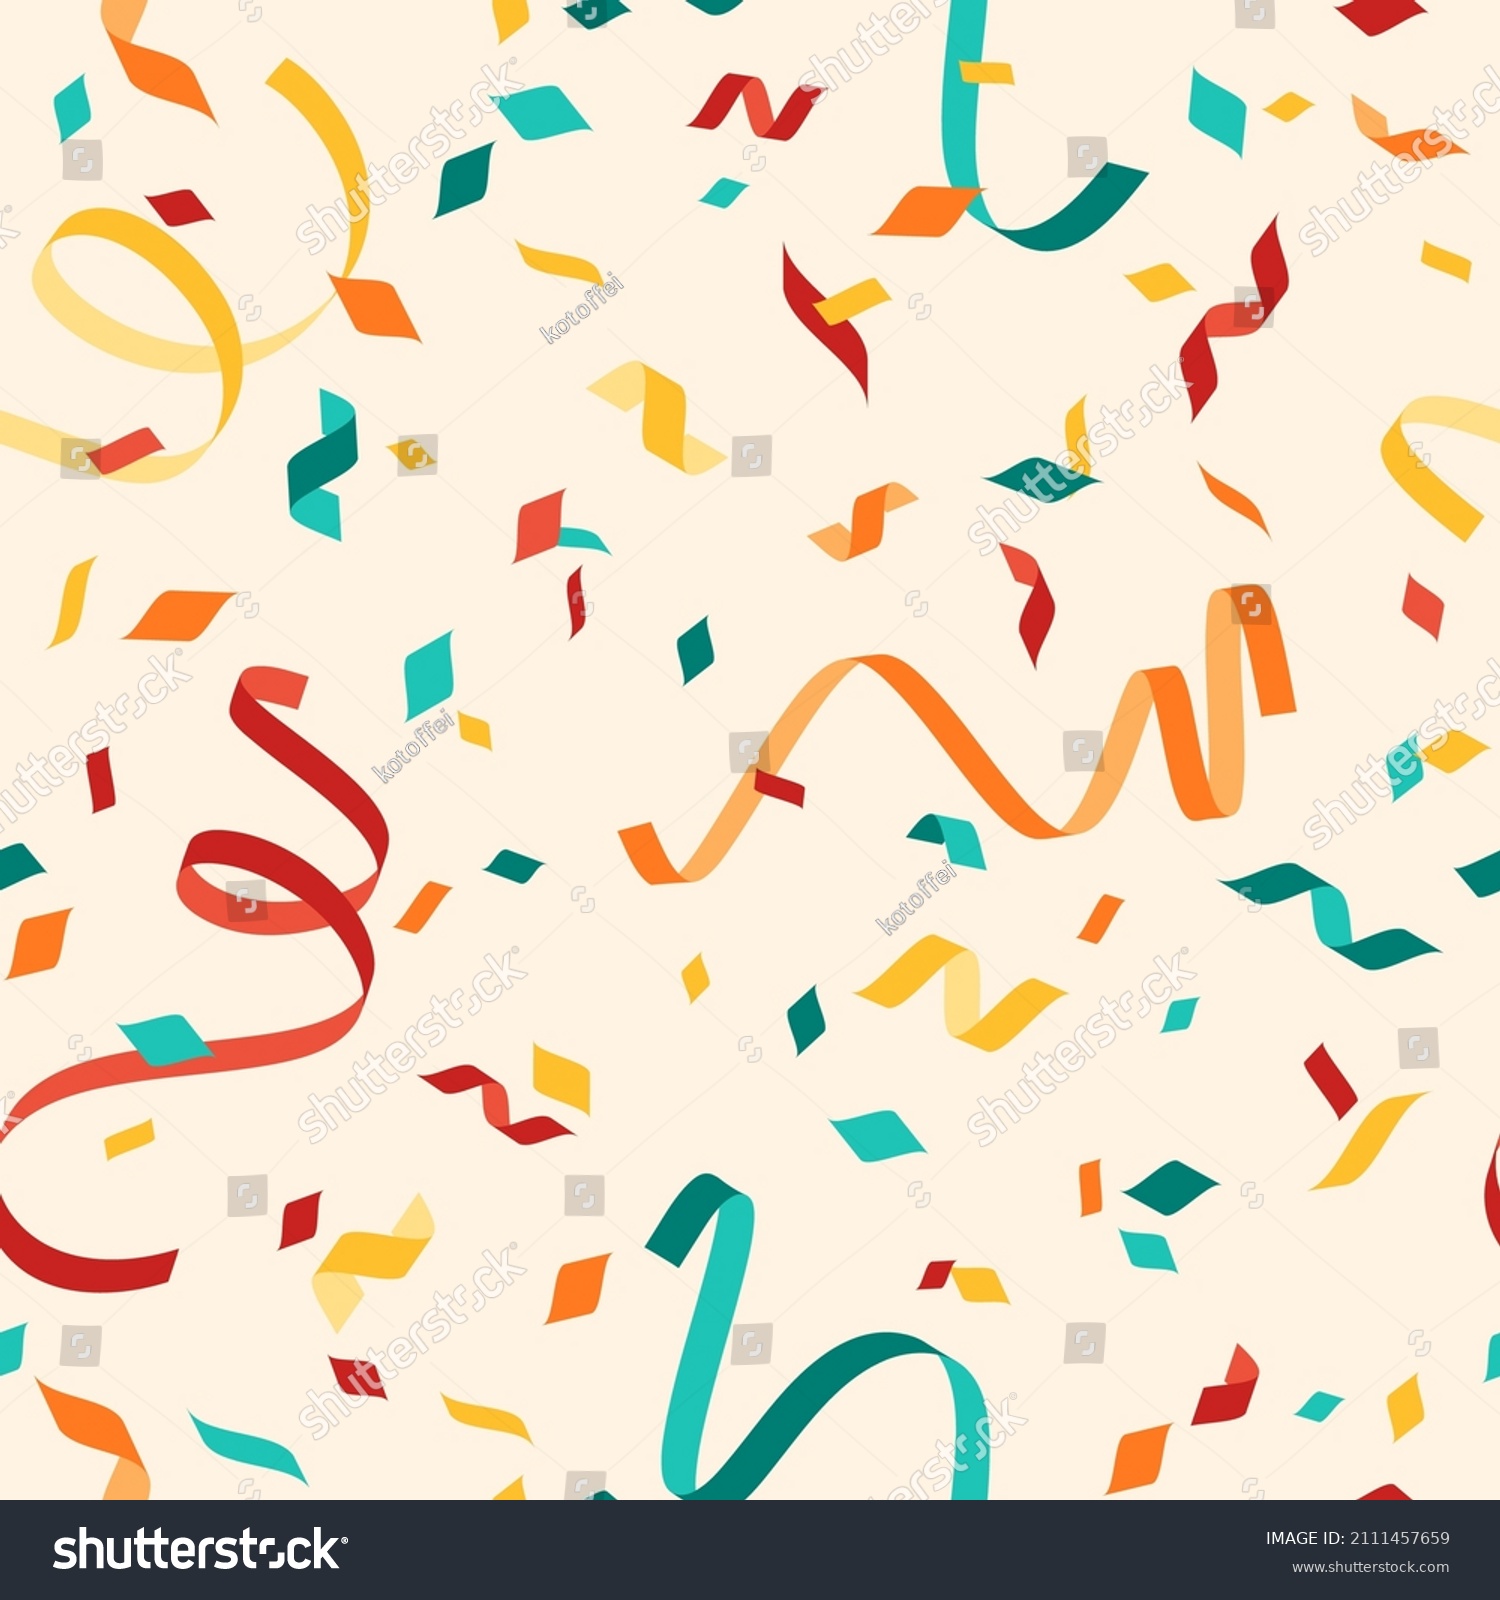 Colorful falling confetti on beige background, seamless carnival pattern. Vector illustration. Carnaval print ornament, yellow, red blue streamers #2111457659